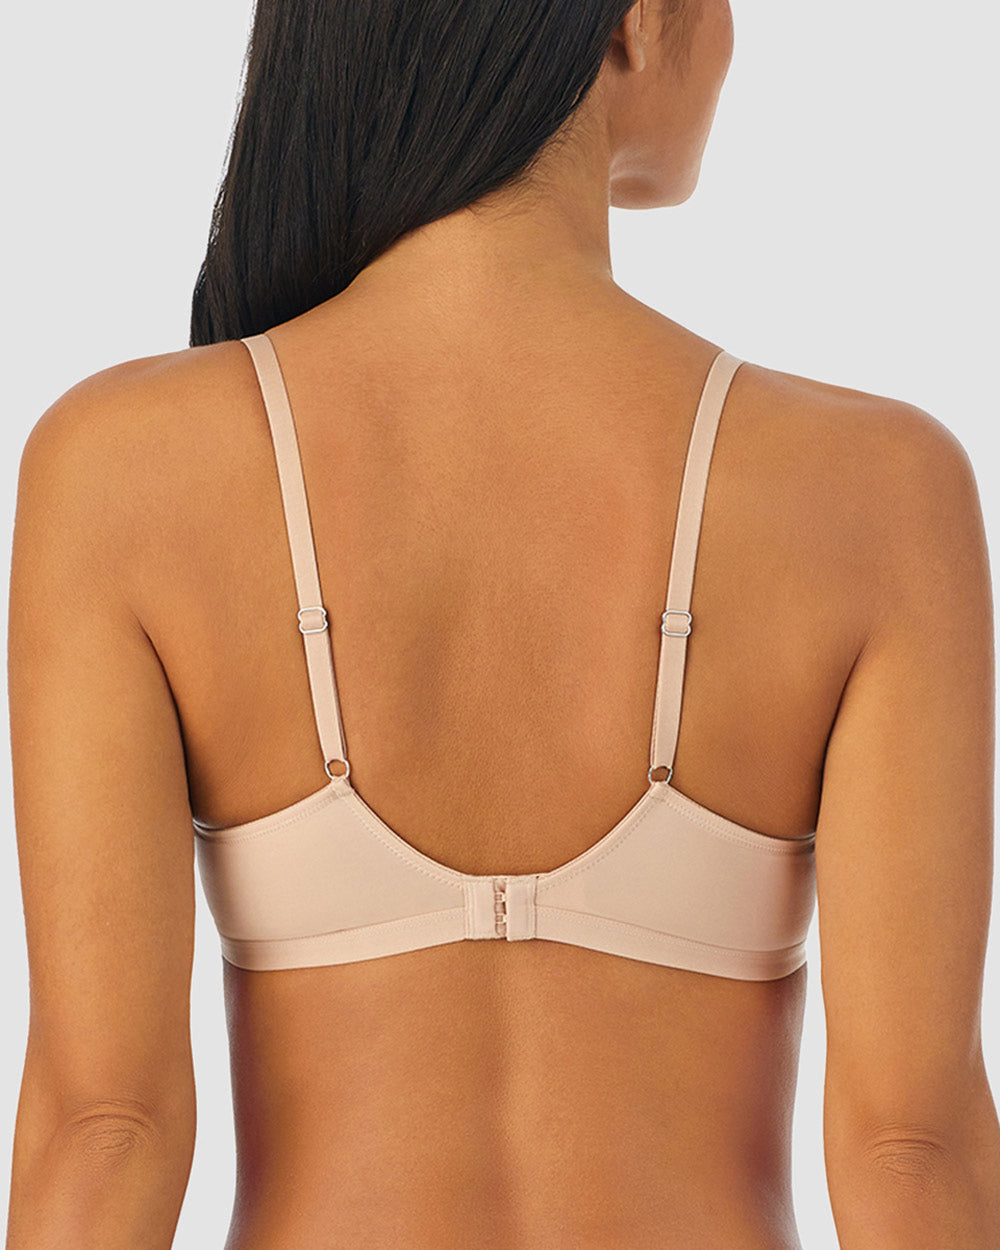 A lady wearing champagne next to nothing micro wireless nursing bra.